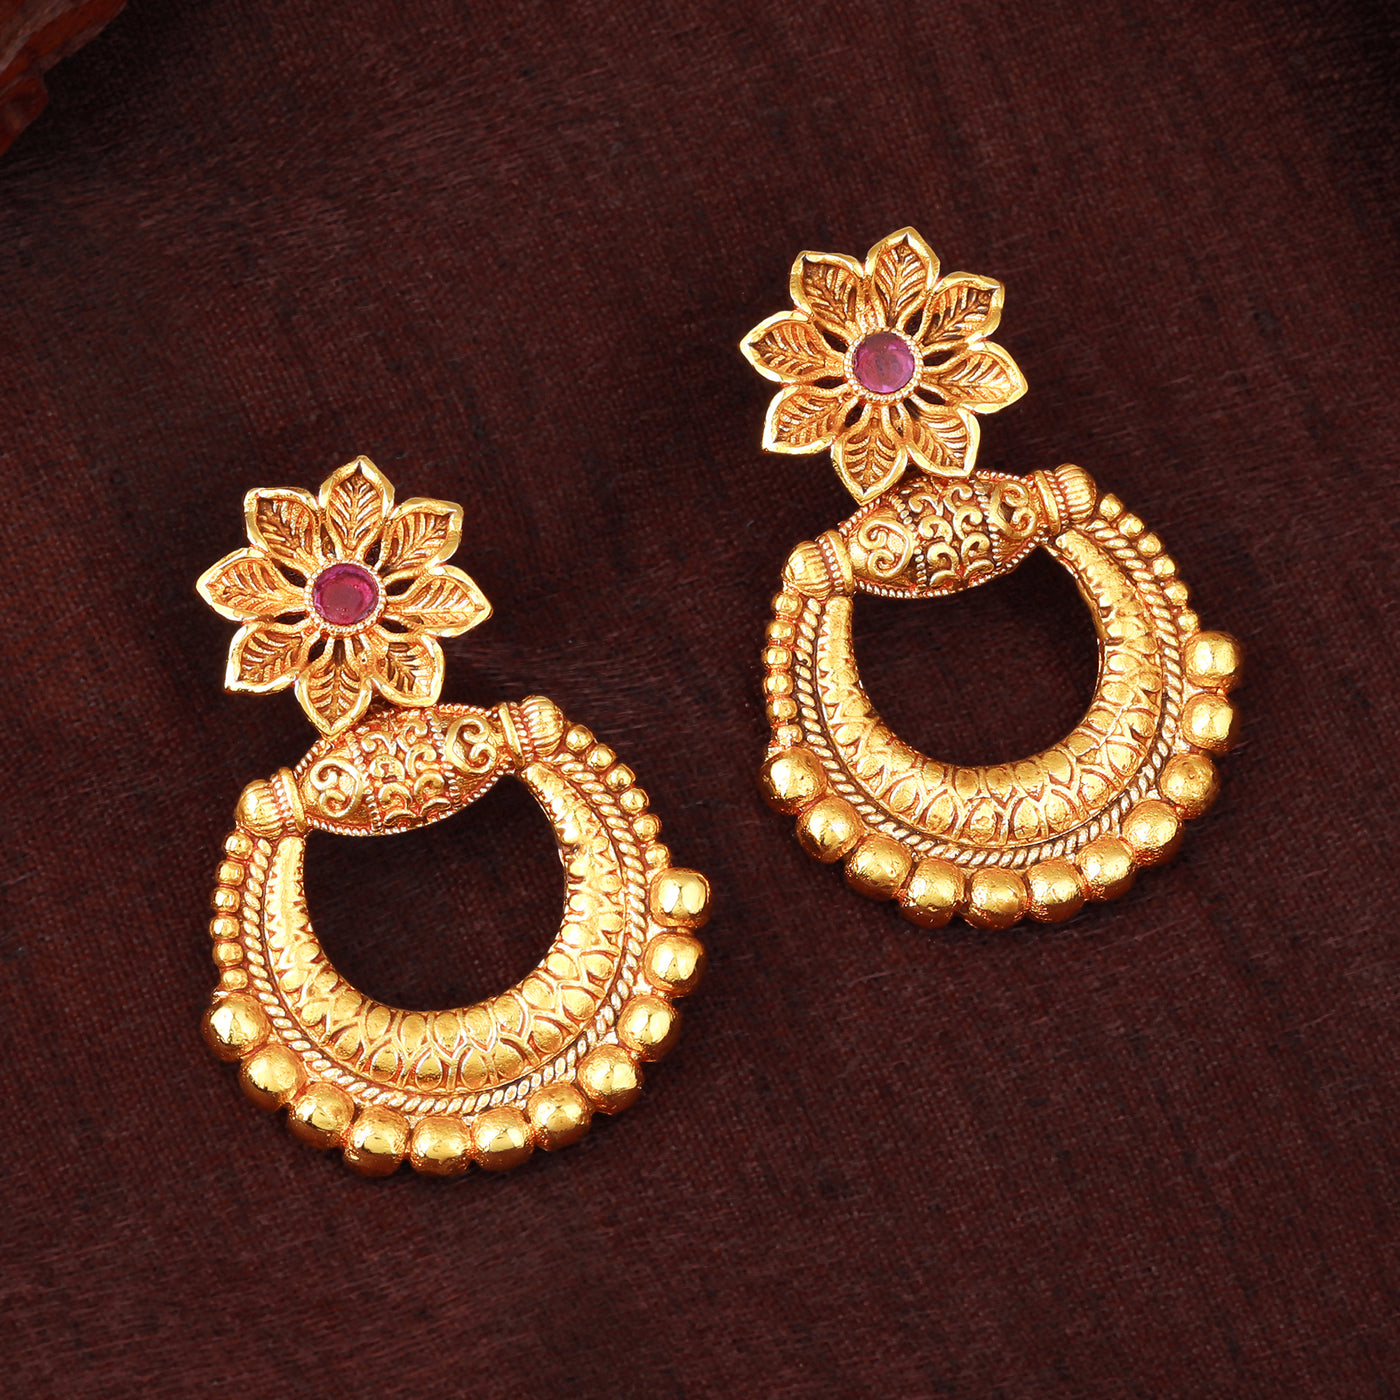 Estele Gold Plated Flower Designer Matt Finish Drop Earrings with Ruby Crystals for Women